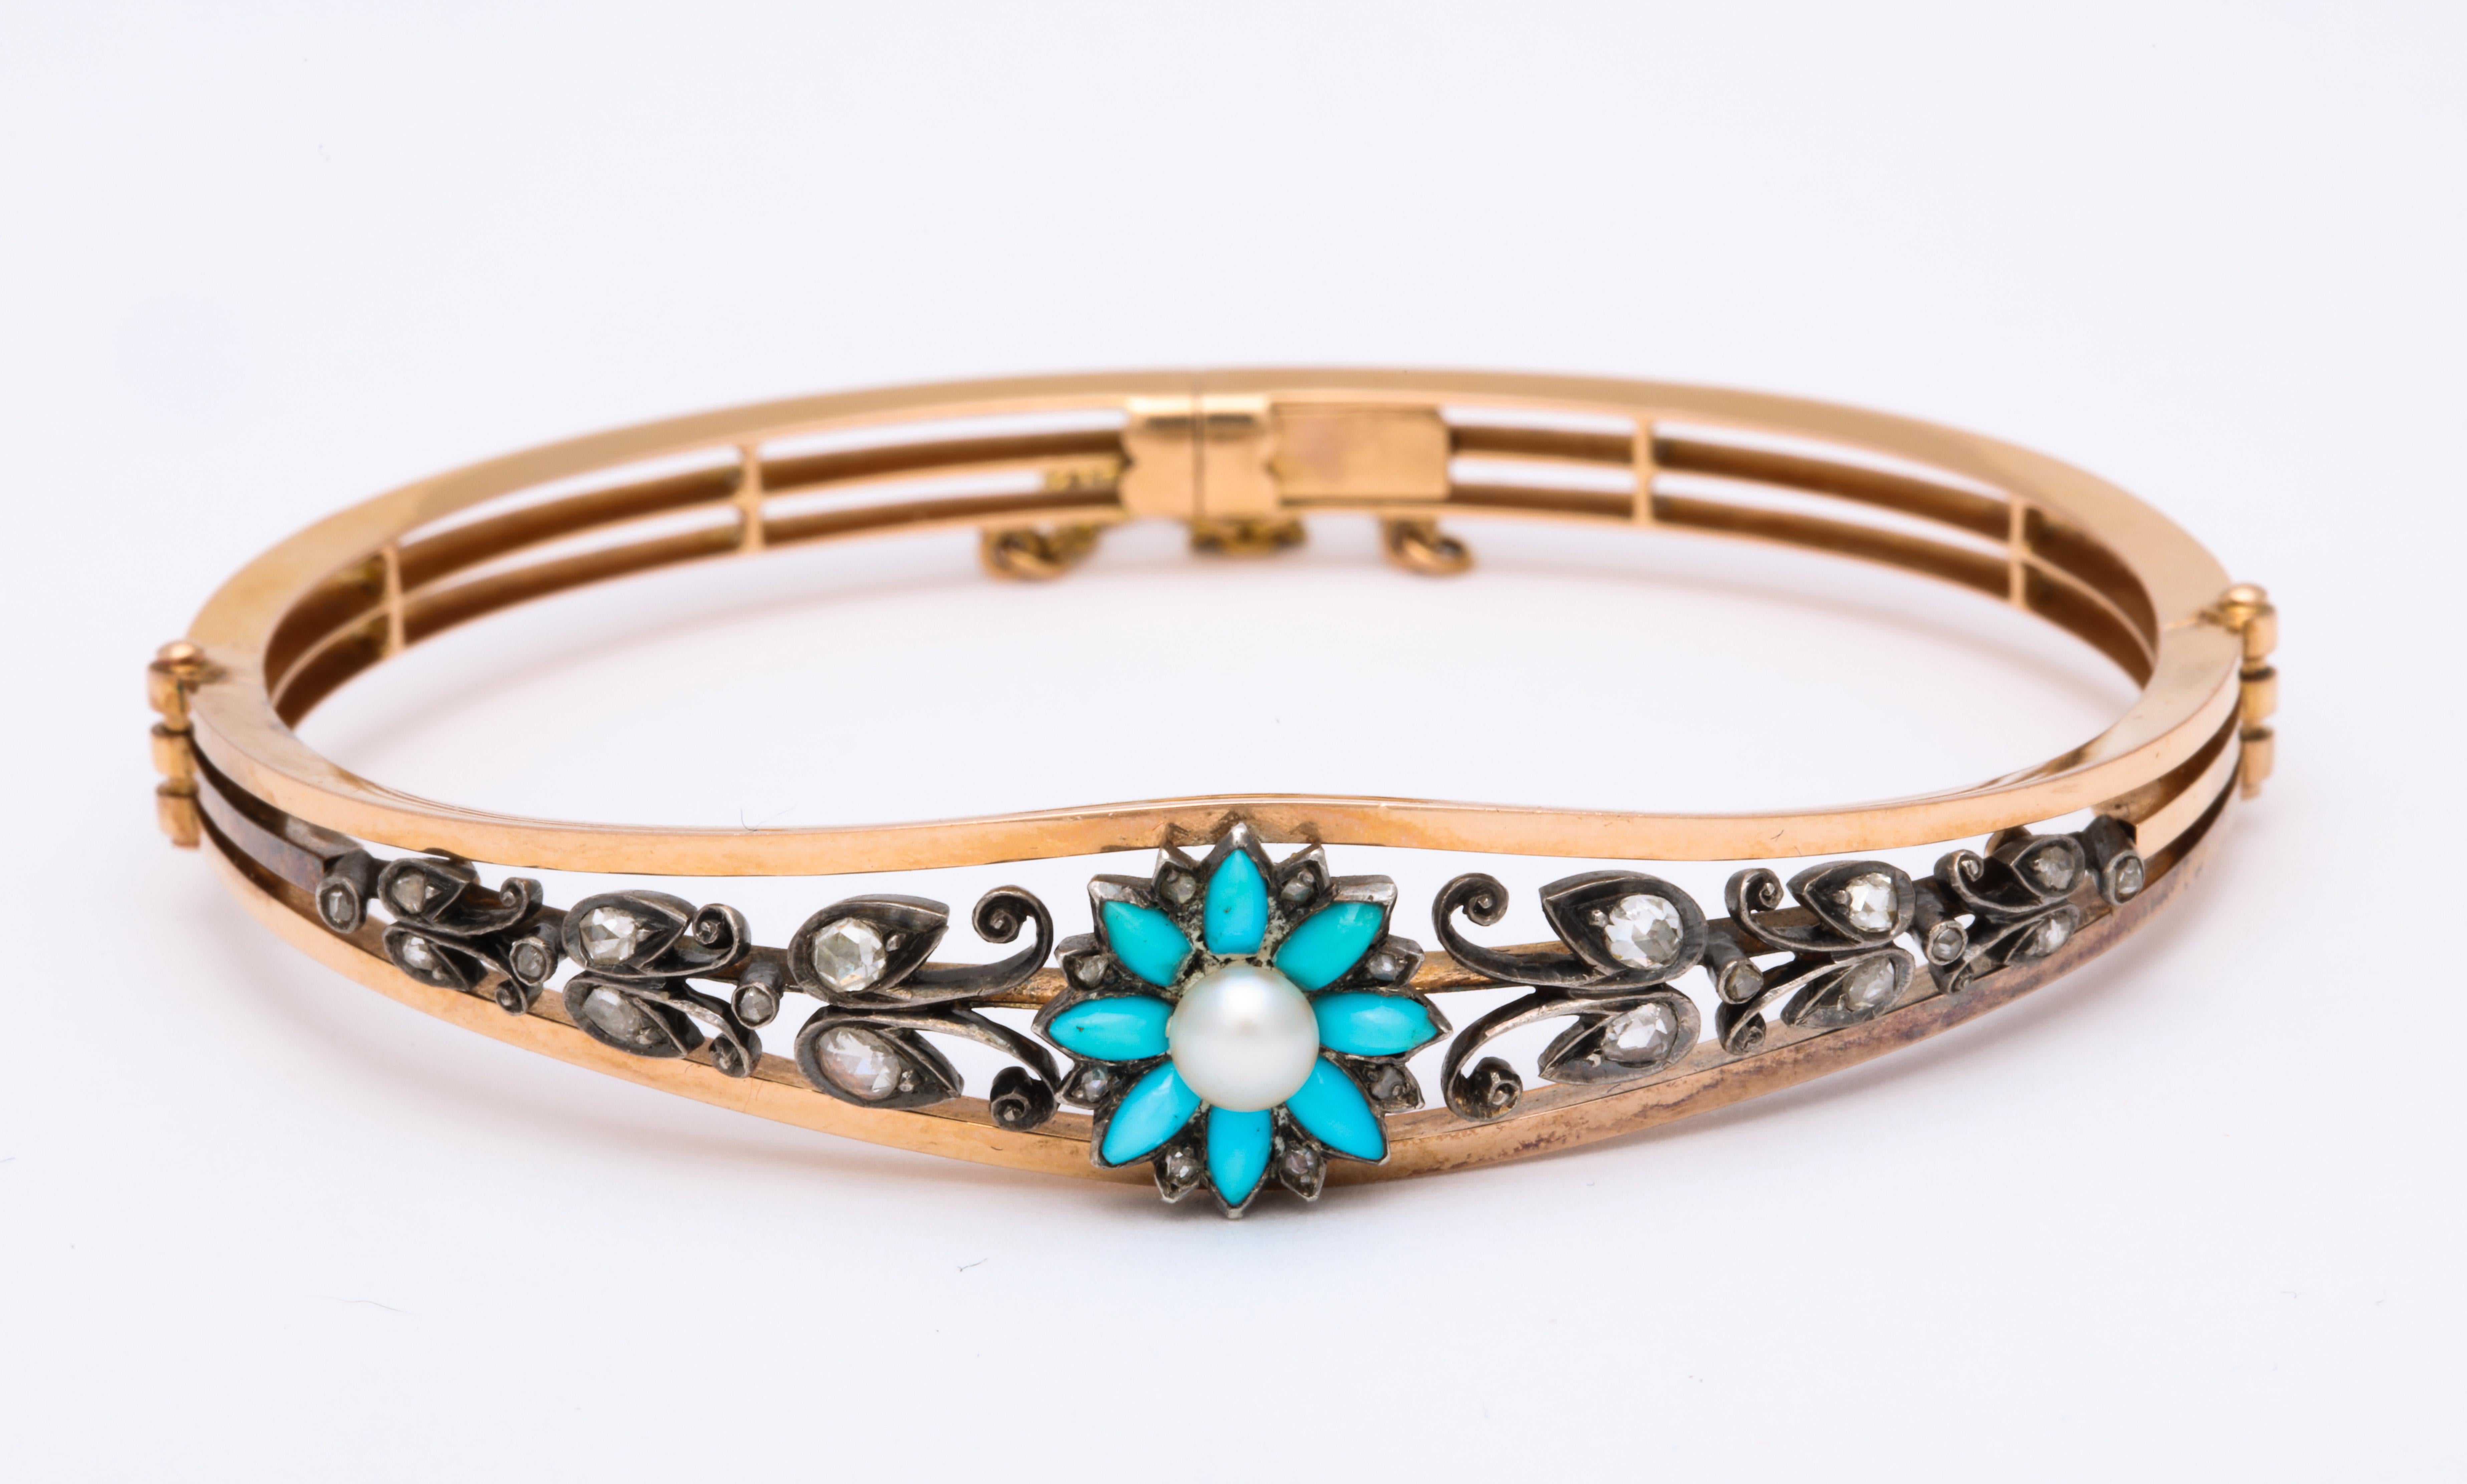 A fine, feminine, 18 kt bangle bracelet sets a Persian turquoise daisy with a natural pearl directly center bringing you warm thoughts of summer all year. Rose diamond dew drops, approximately .25 cts, rest on the leaves that wrap the top of your